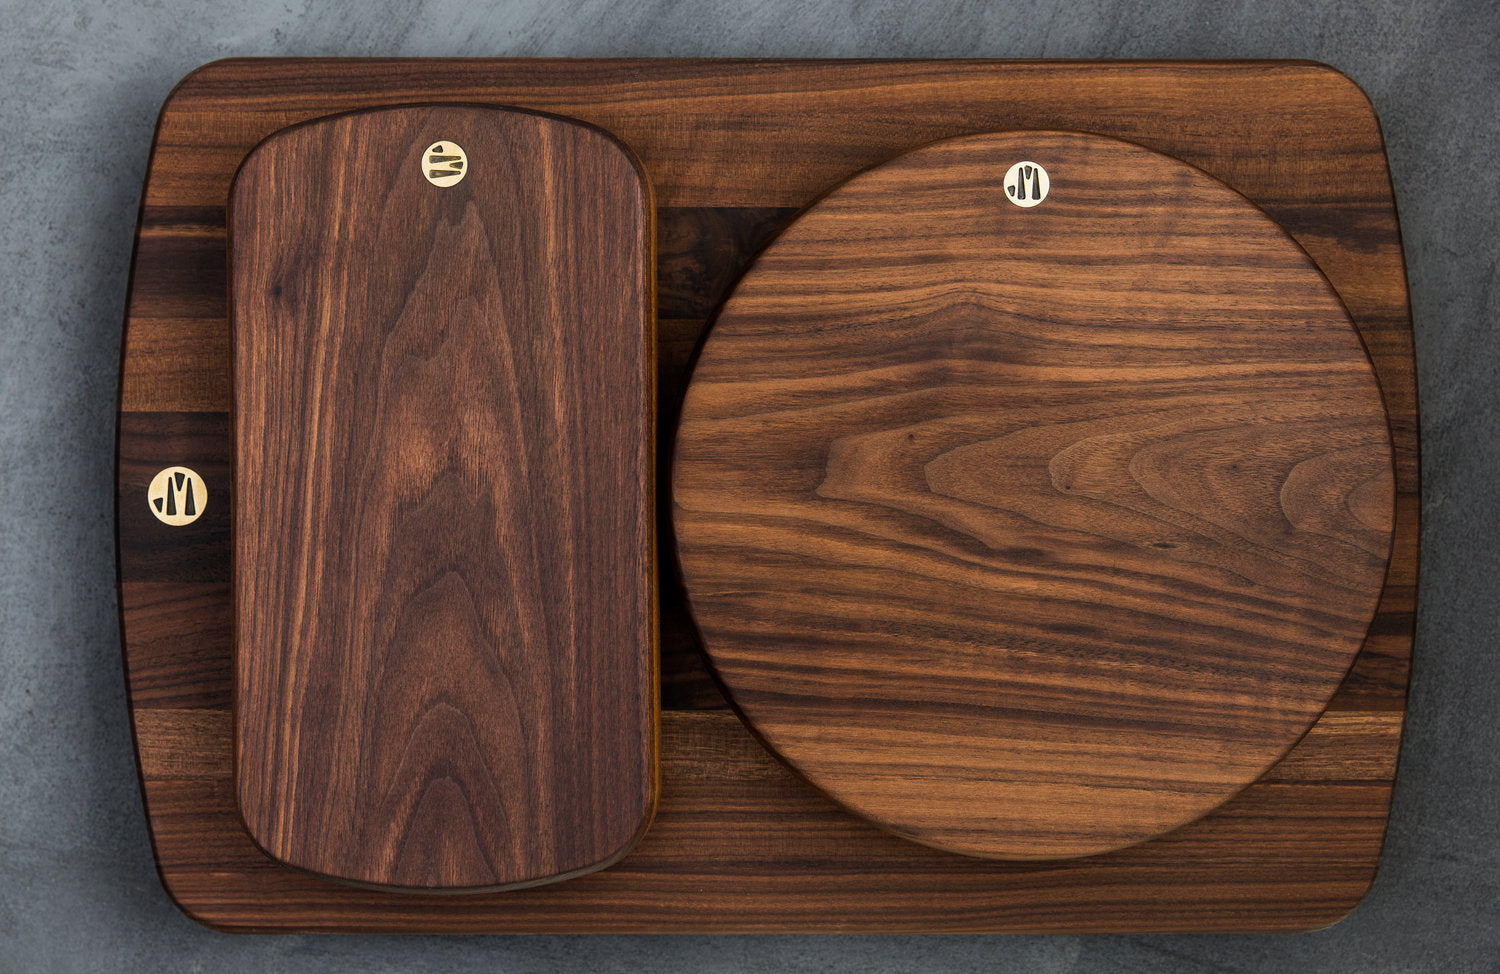 Four Hudson Cutting Boards in Different Shapes and Sizes Stacked